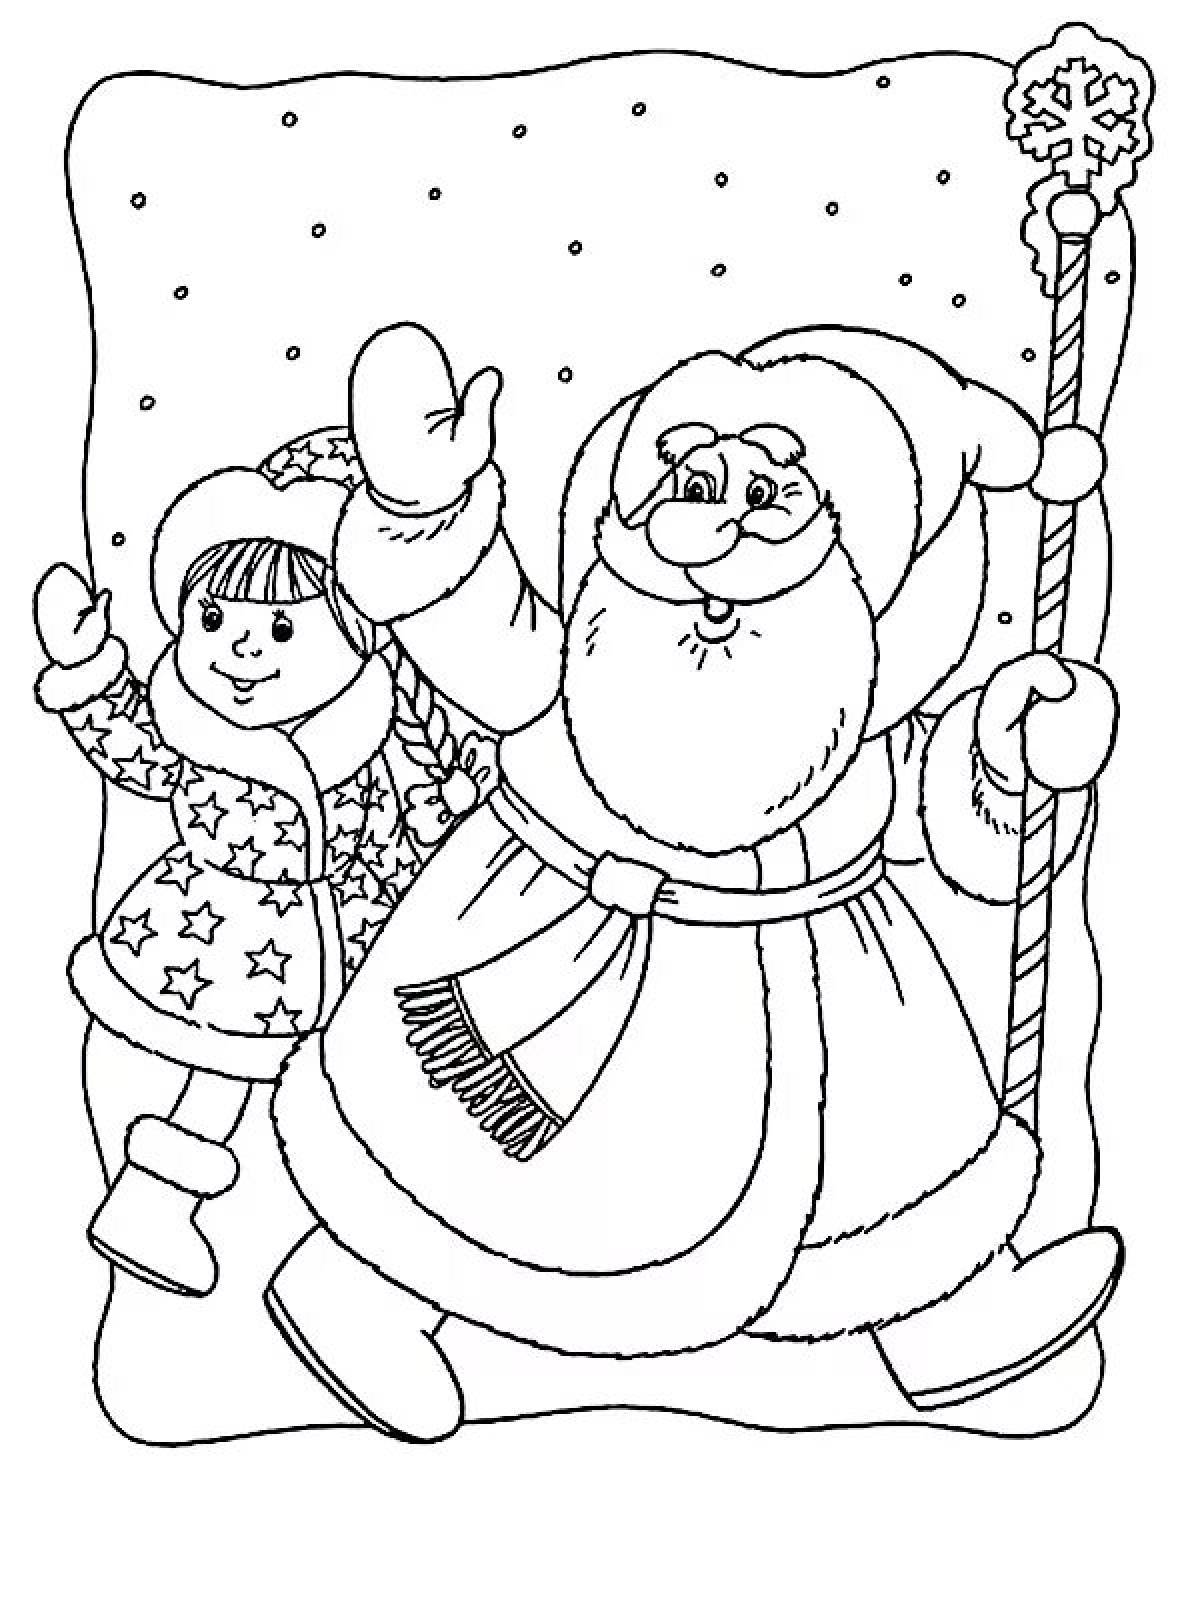 Santa Claus and Snow Maiden drawing #4